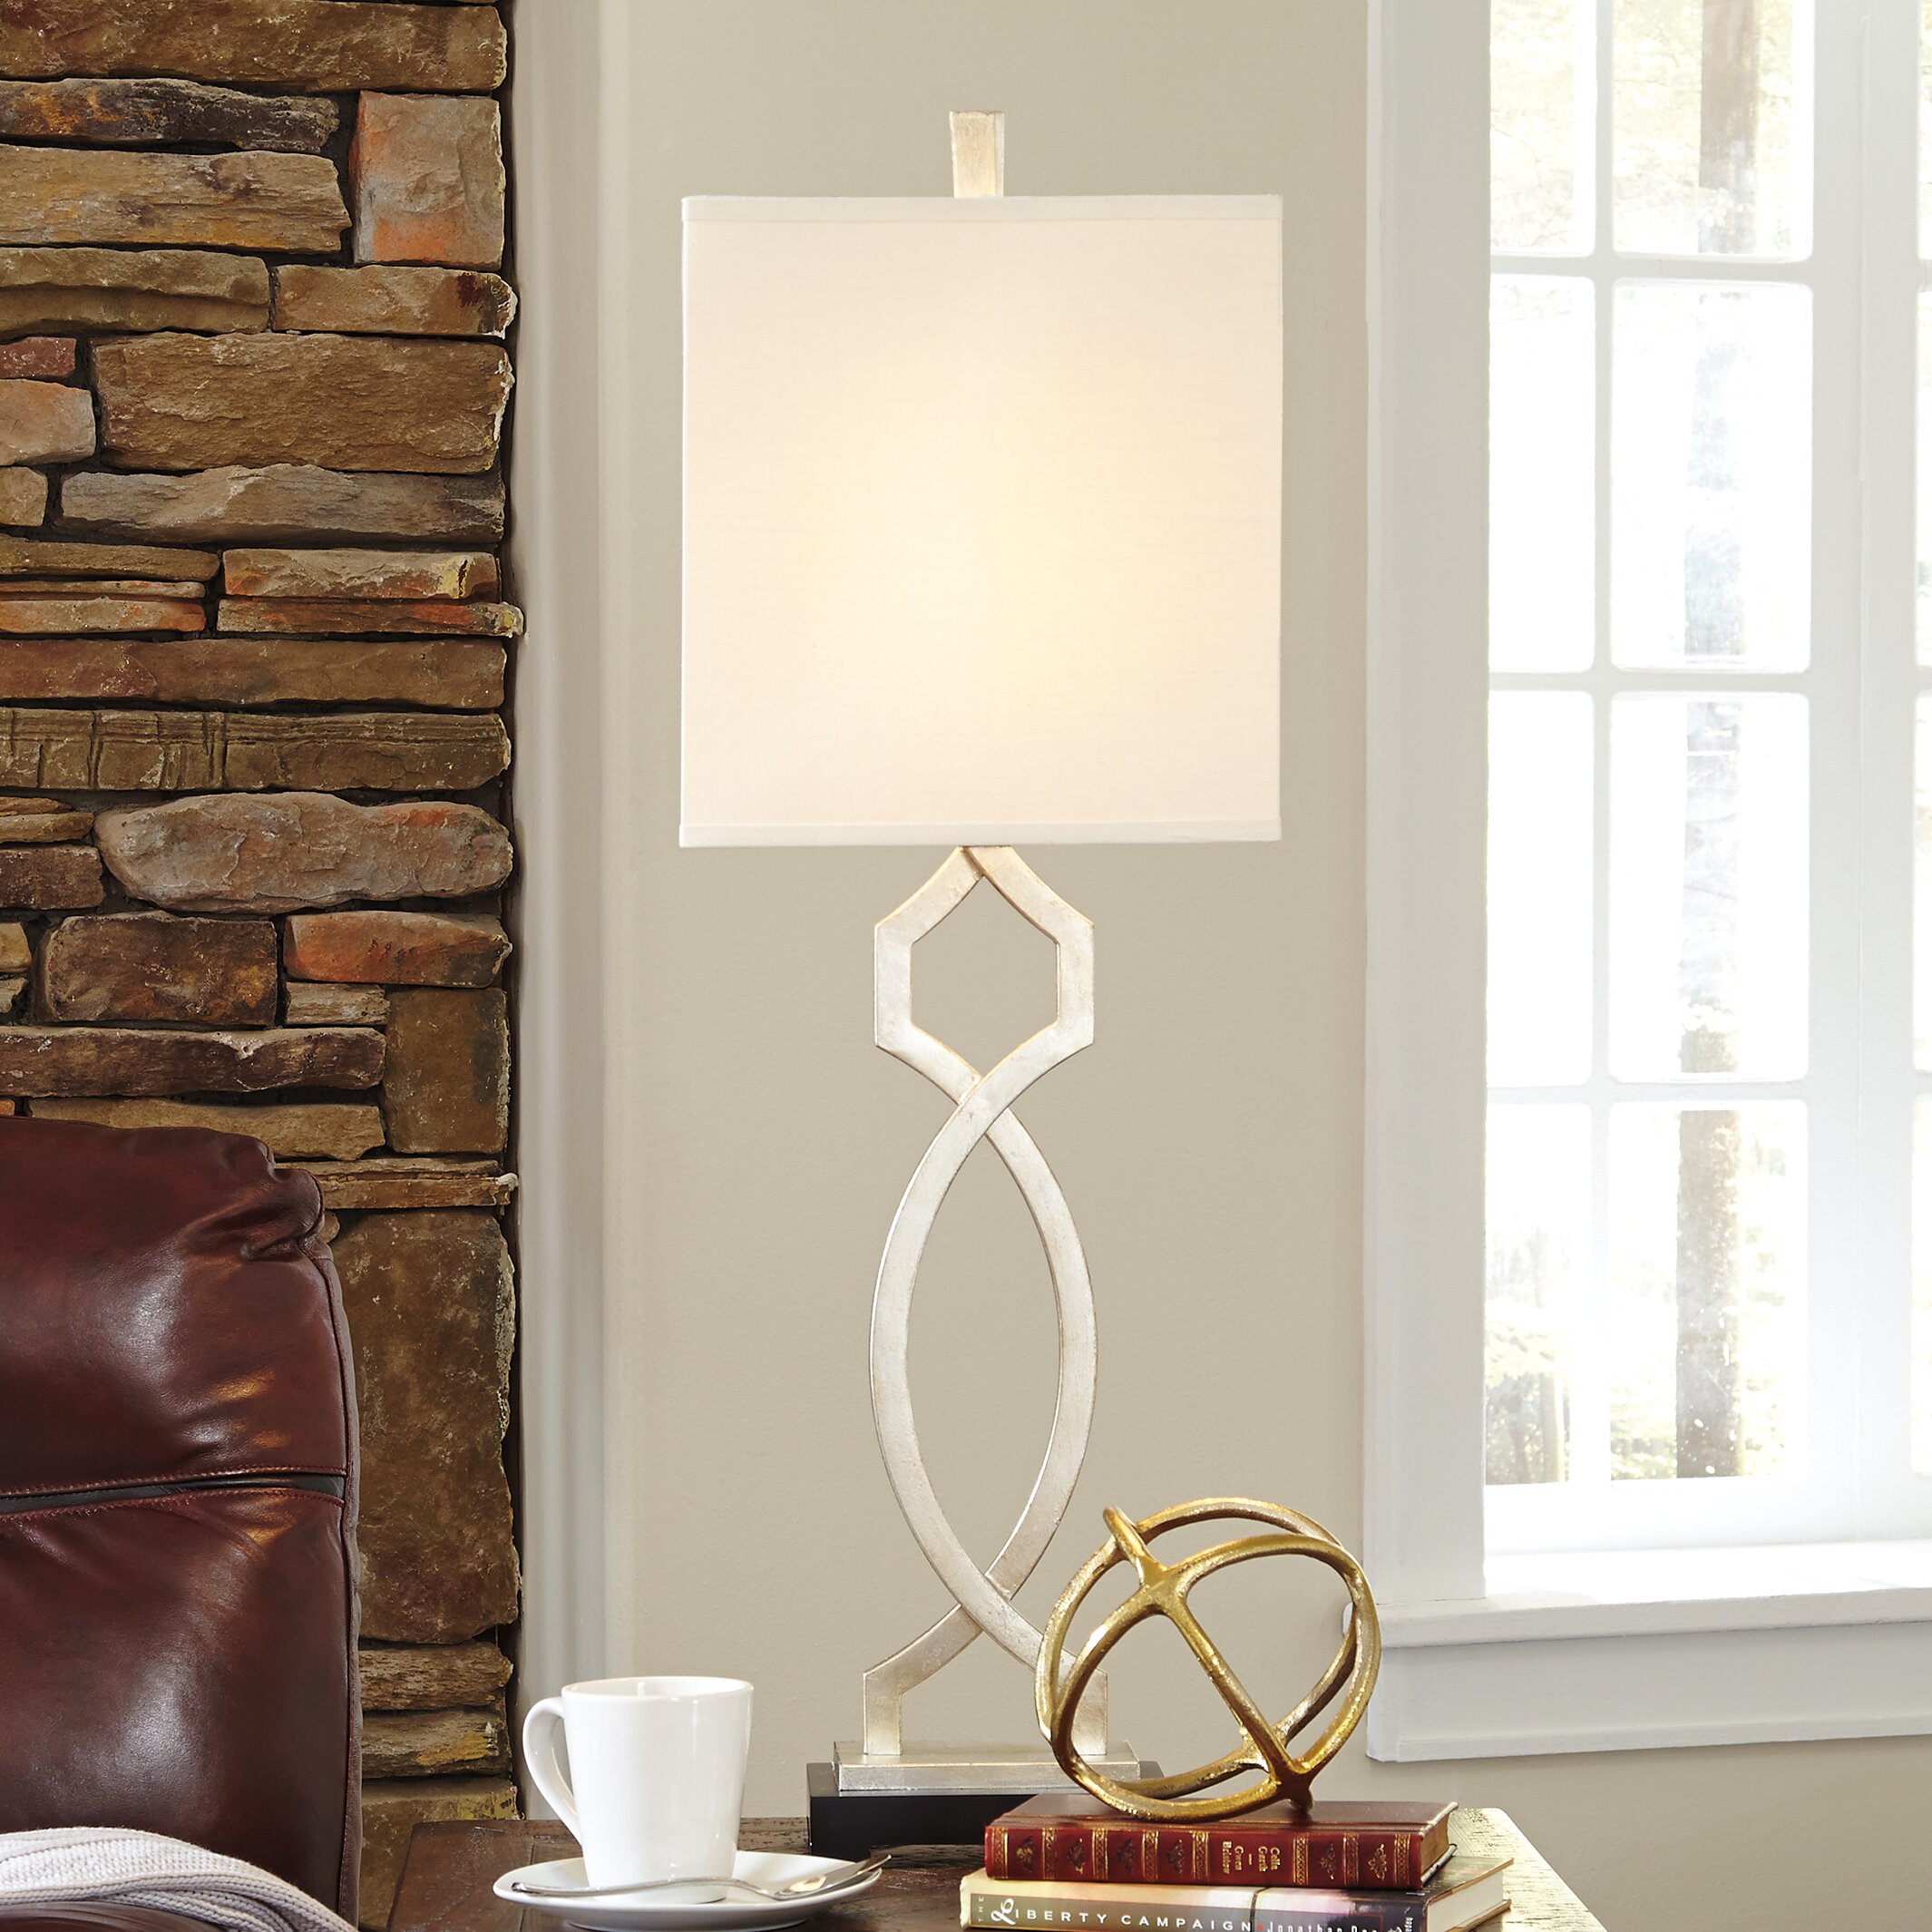 Table Lamps With Rectangular Shades - IHKD OLLIE MCDANIEL BLOG'S